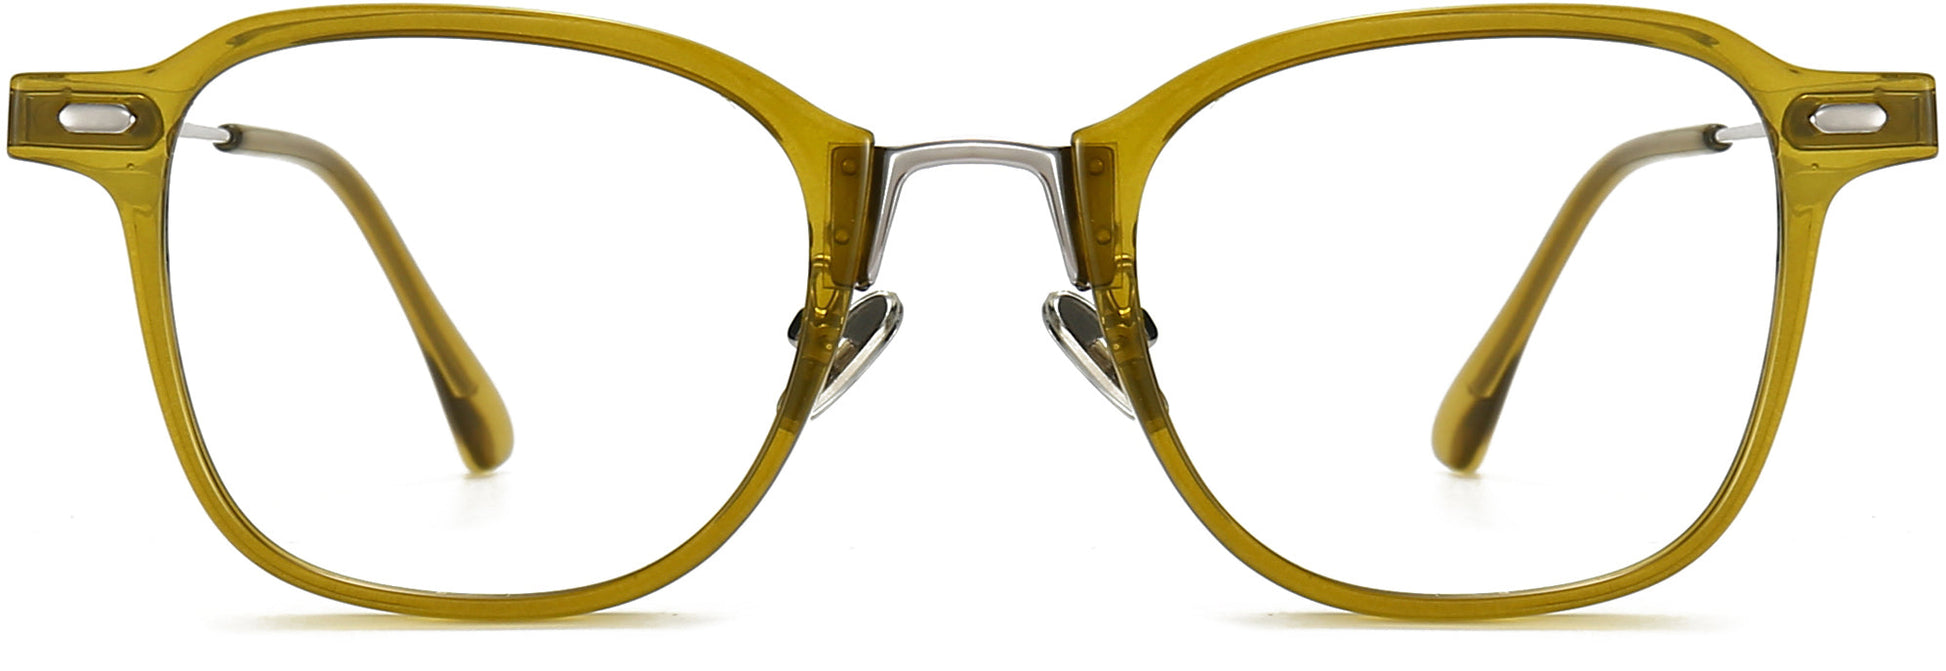 Frankie Square Green Eyeglasses from ANRRI, front view